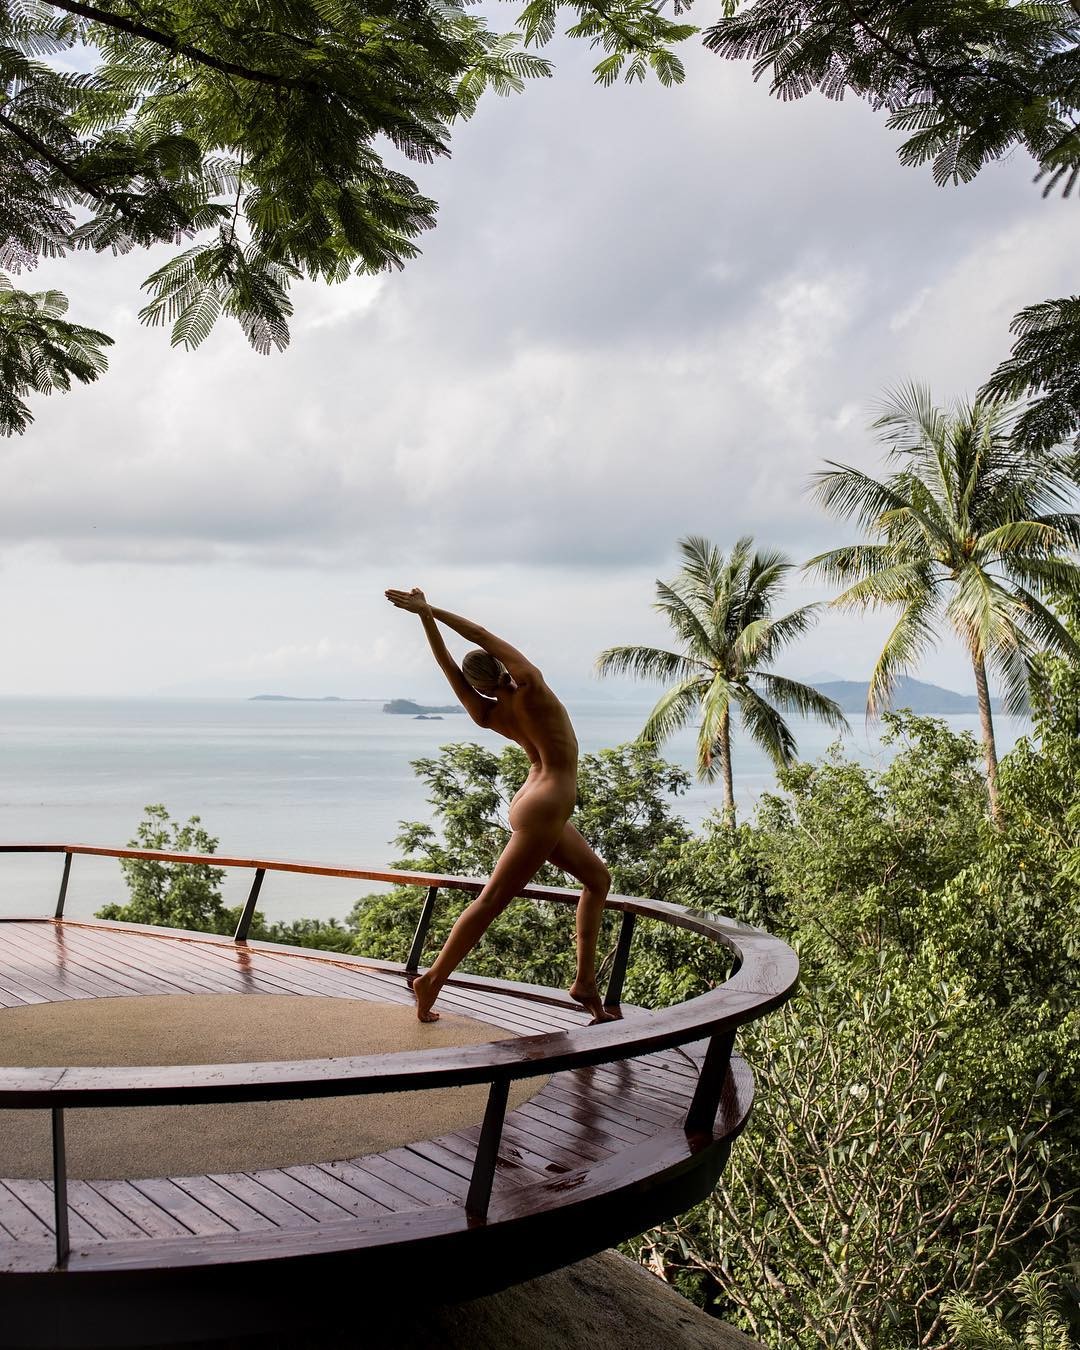 Instagram blogger Nude Yoga Girl poses for one of her images while at the L2 Residence villa on the island of Koh Samui in Thailand. Photo: Instagram @nude_yogagirl